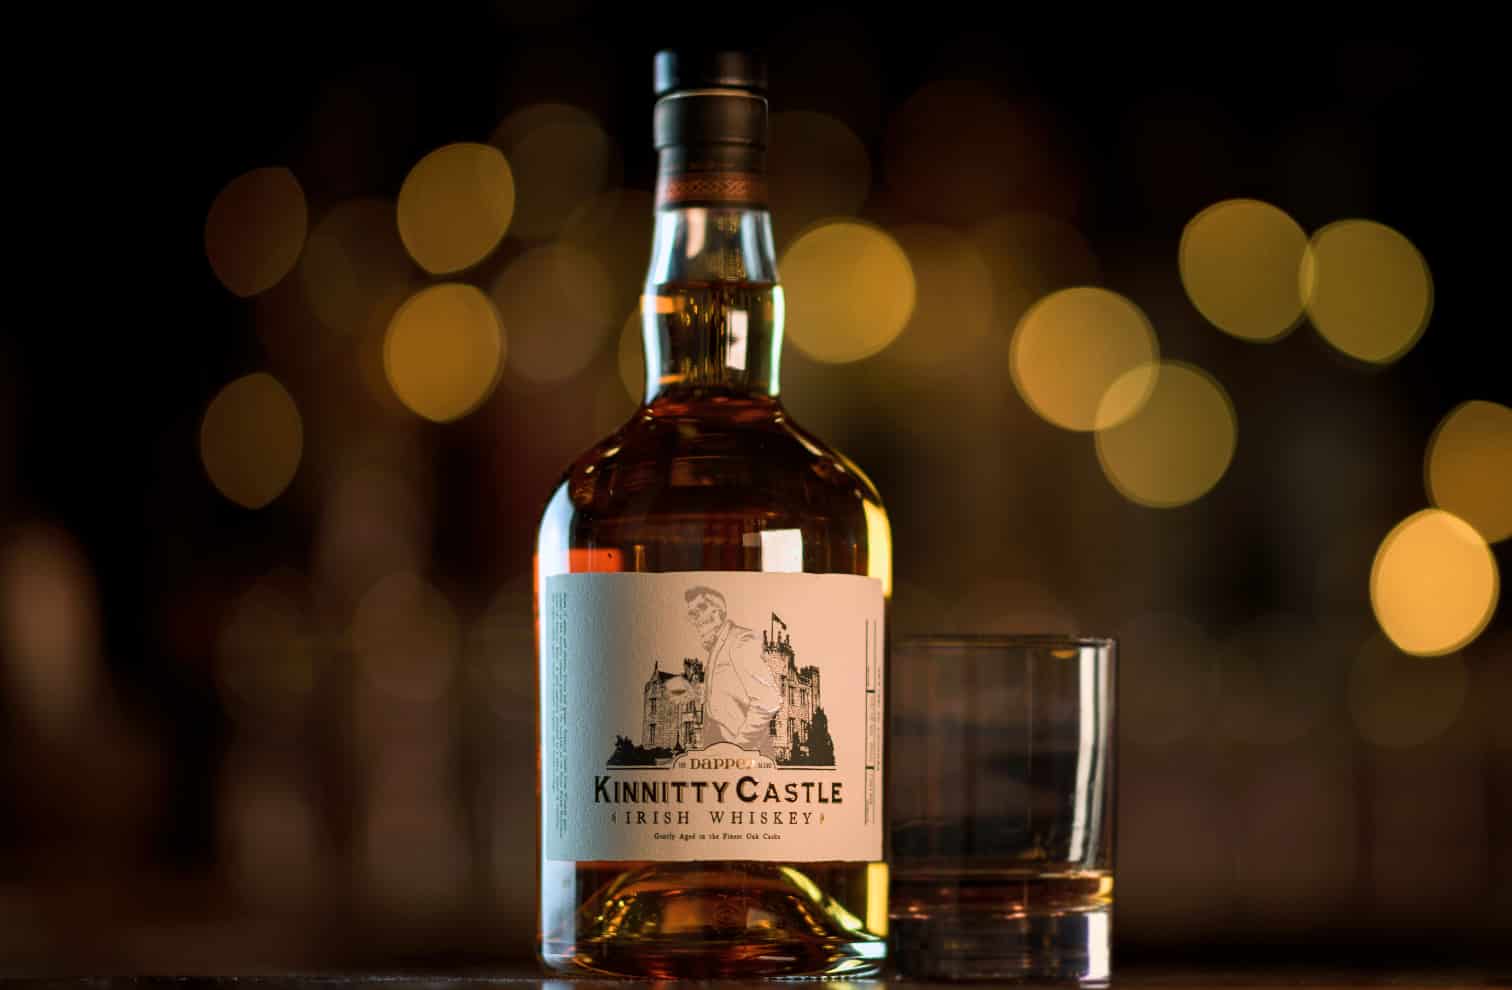 A bottle of Kinnitty Castle Irish Whiskey Aged 10 Years next to a bottle of Kinnitty Castle IRish Whiskey Dapper Blend on a table with a blurred background